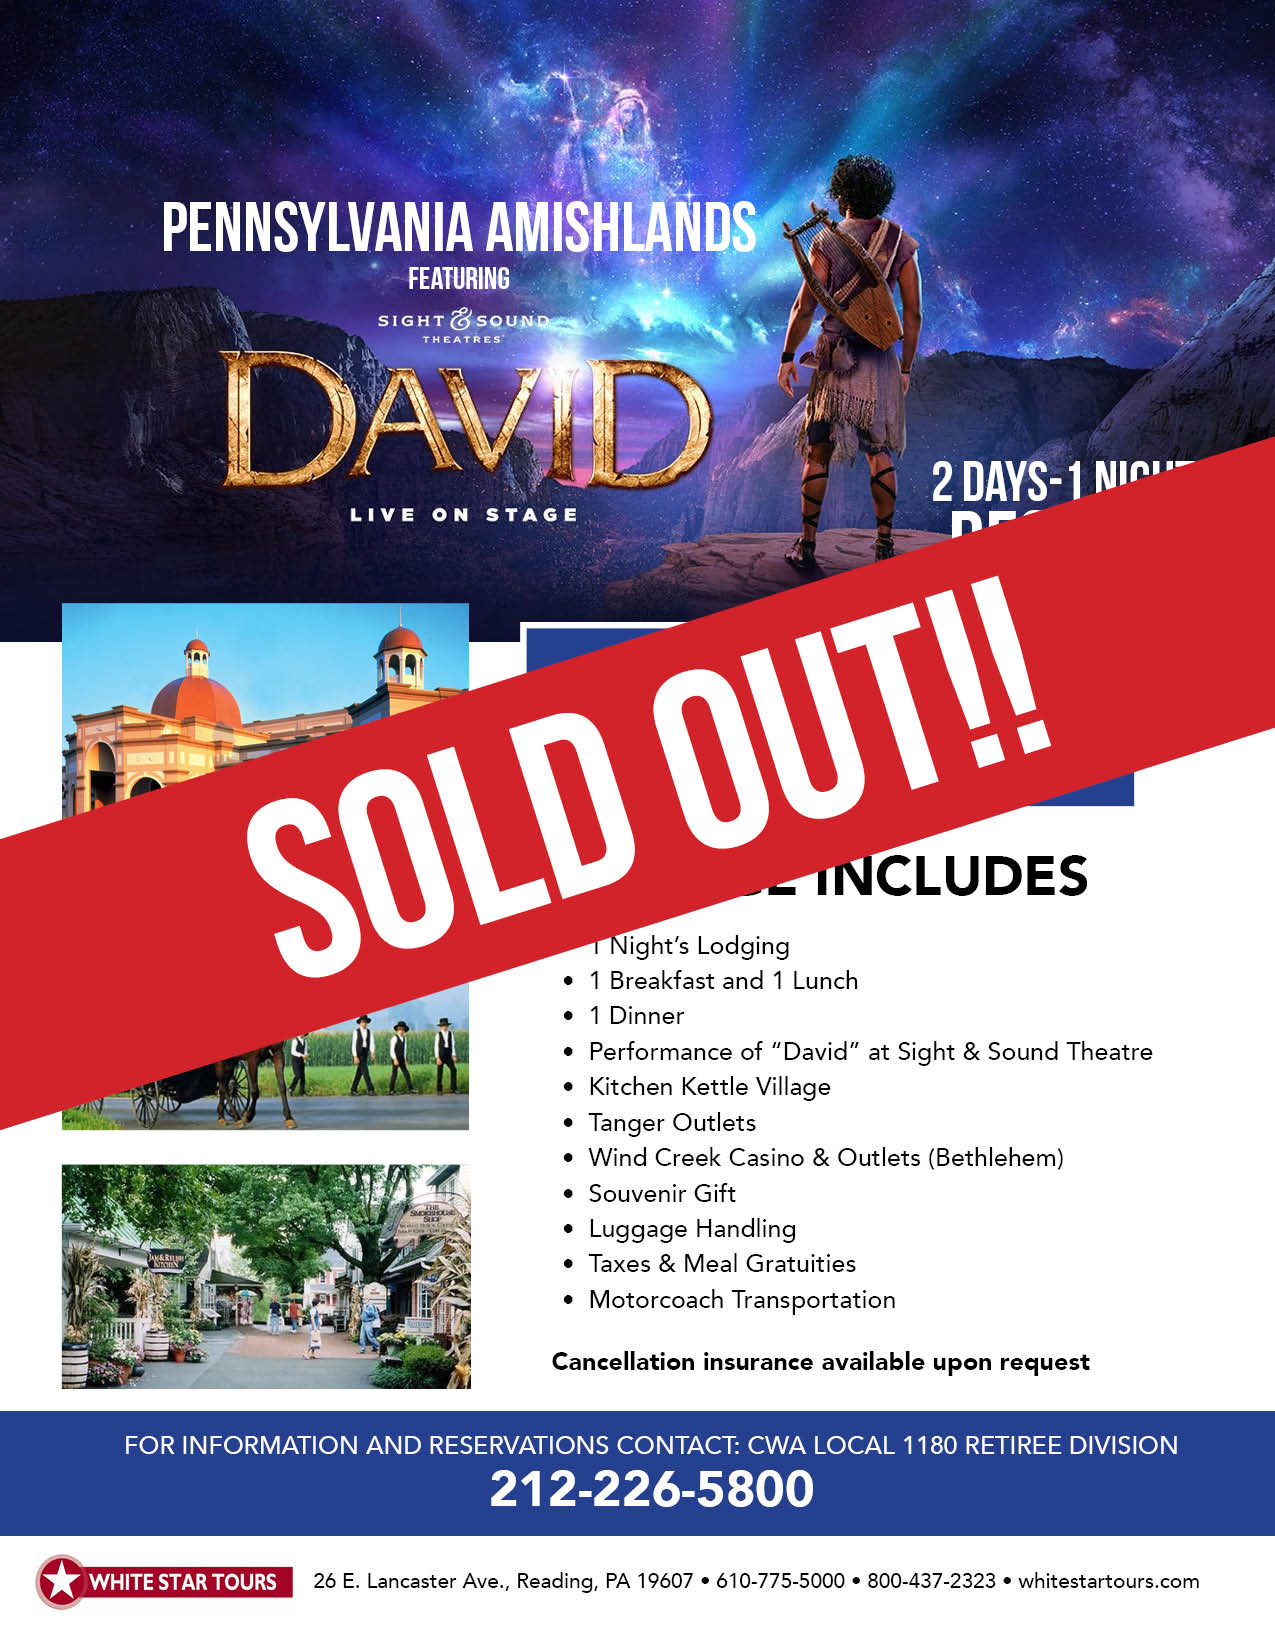 PA Amishlands Trip Flier_SOLD OUT